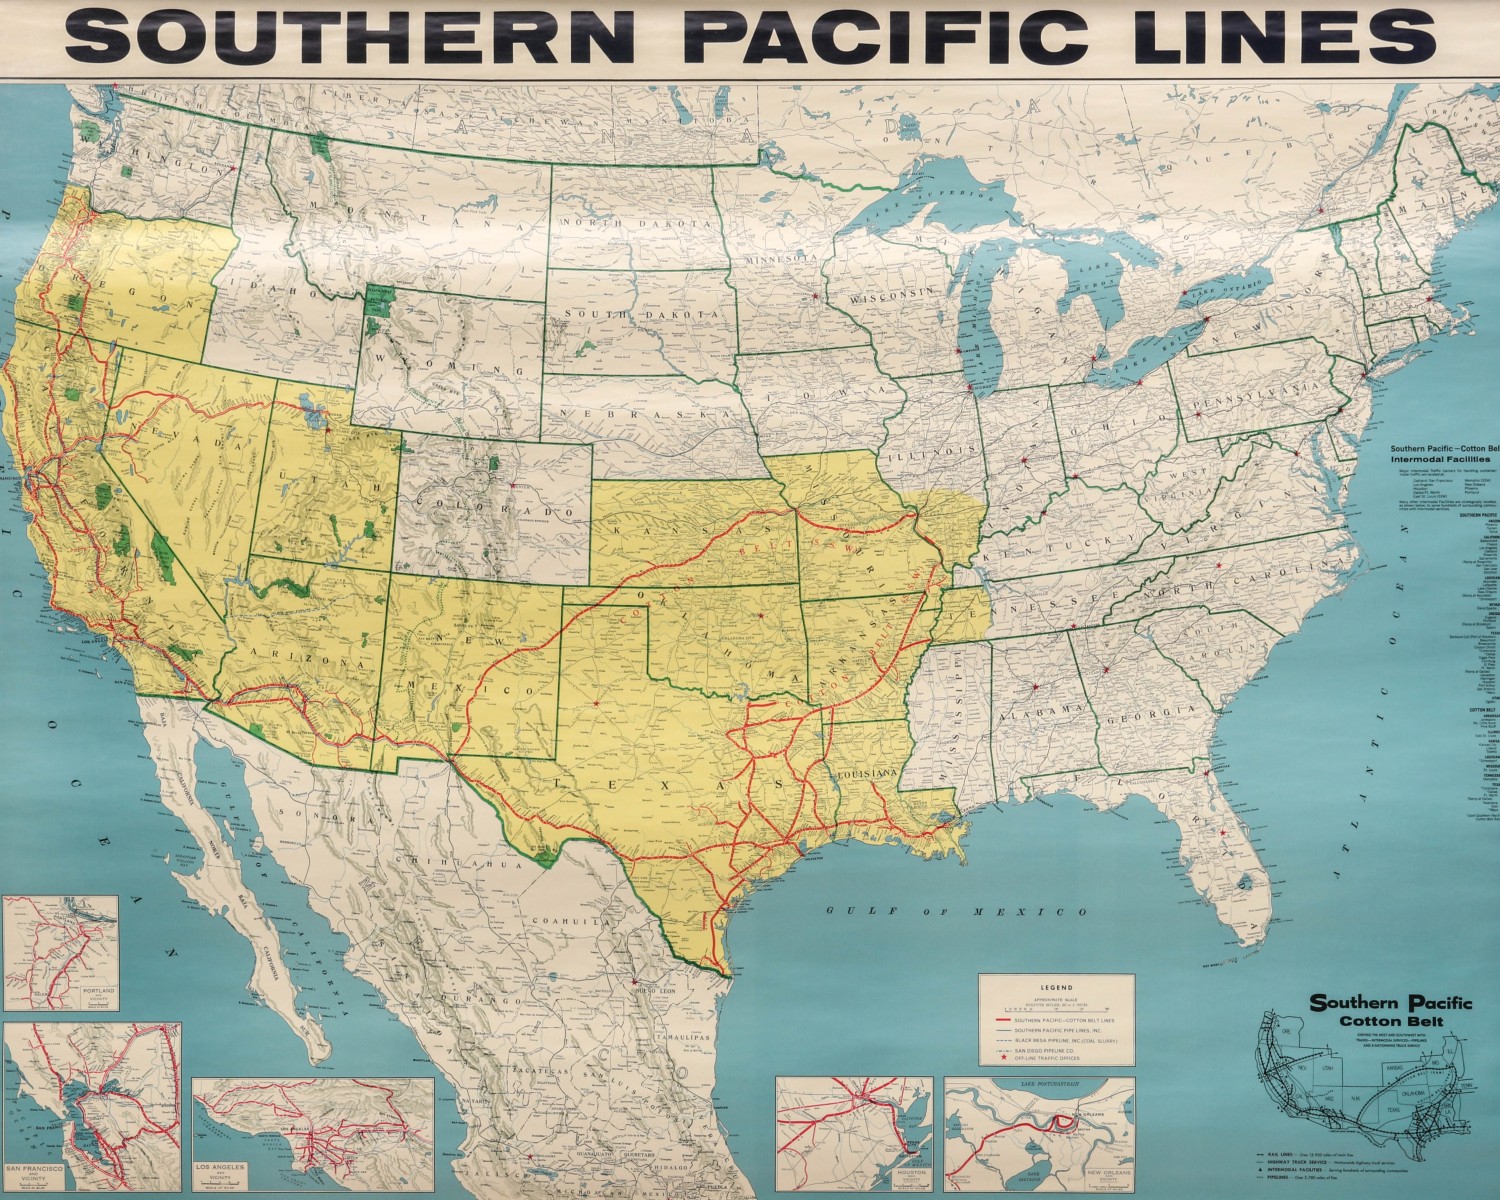 A SOUTHERN PACIFIC RAILROAD WALL MAP